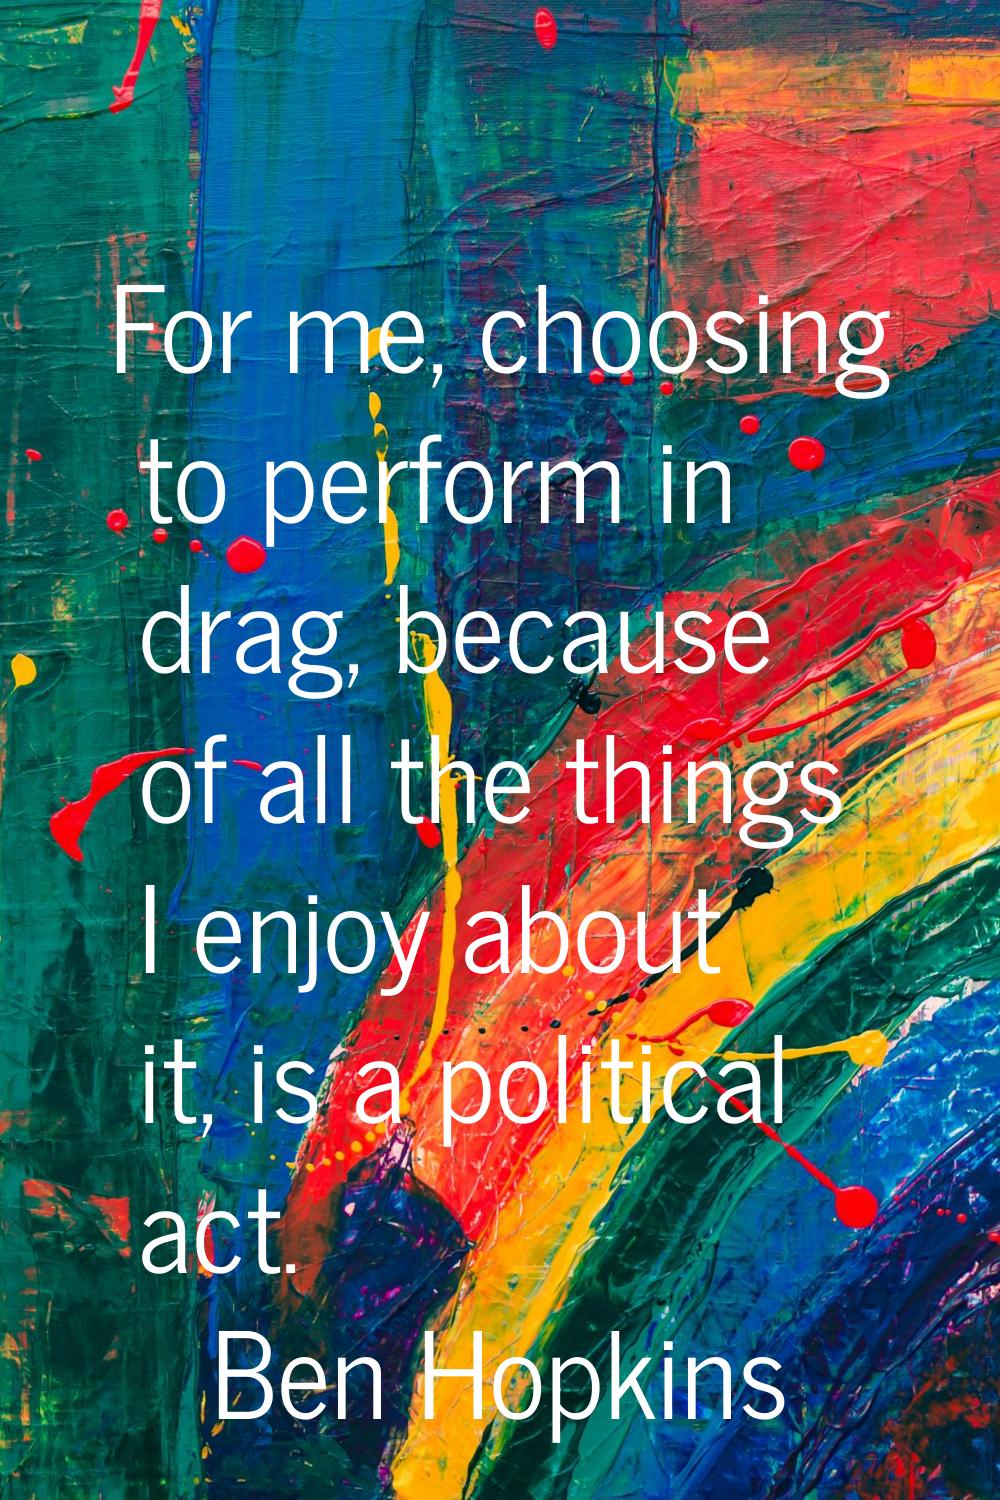 For me, choosing to perform in drag, because of all the things I enjoy about it, is a political act